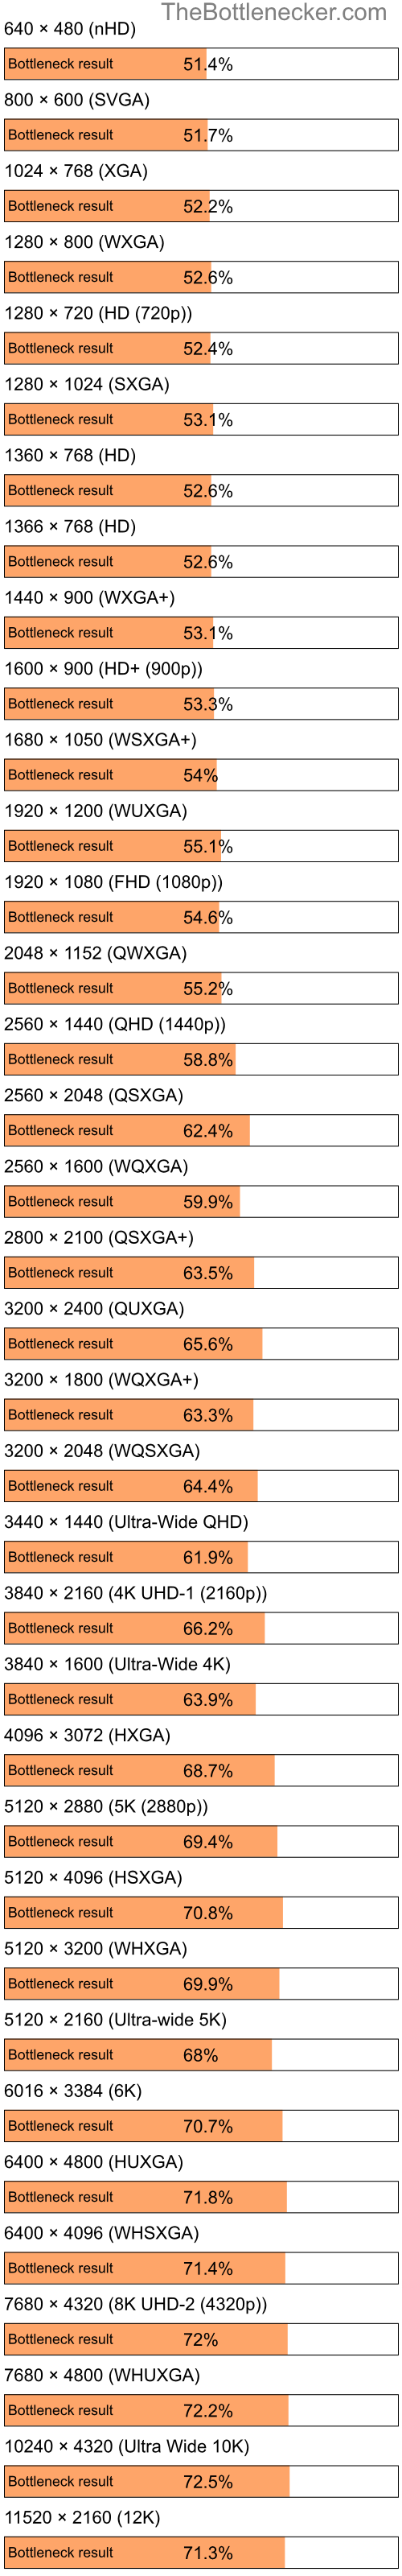 Bottleneck results by resolution for Intel Pentium 4 and NVIDIA GeForce 9300M G in Processor Intense Tasks